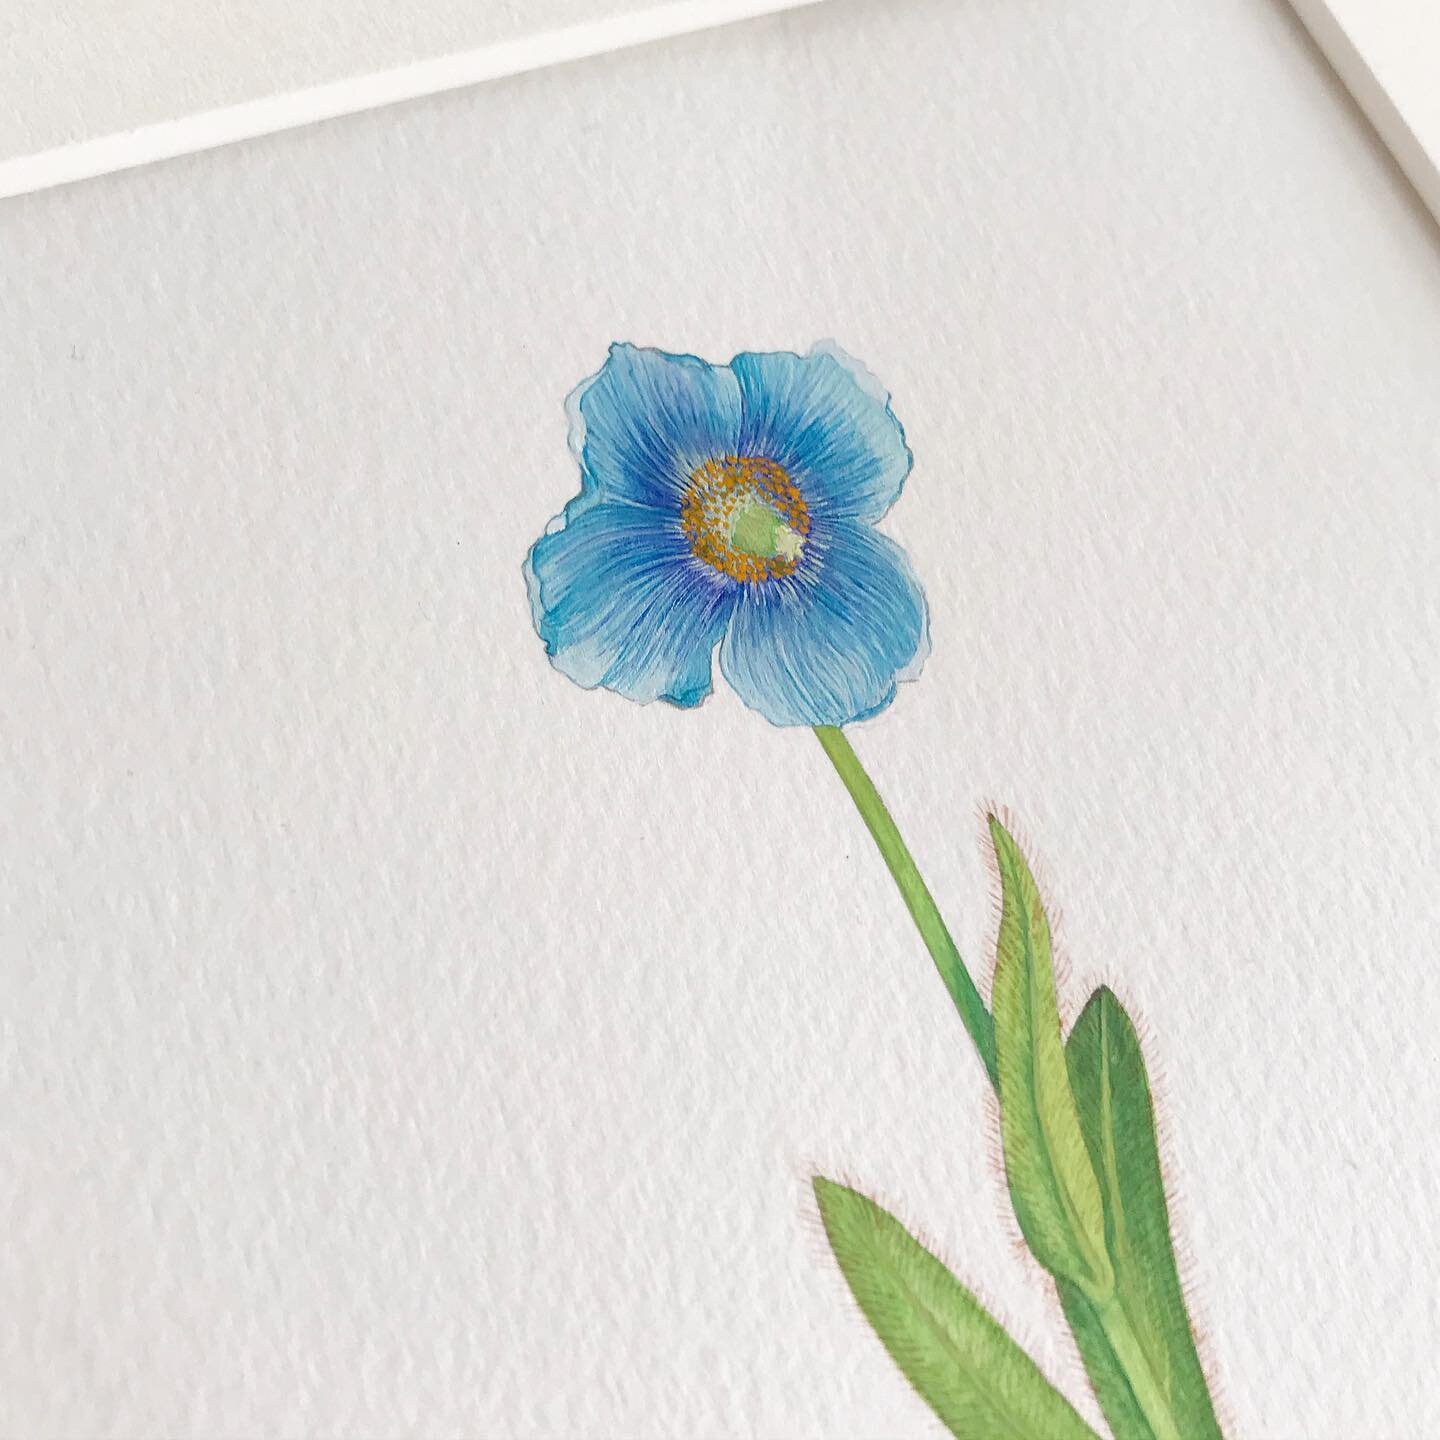 #meconopsis blue Himalayan poppy. It is very hard to grow and I remember seeing a lot of them @the_rhs #chelseaflowershow in 2018. A lovely commission to come back to work to. Seen here in a handmade frame and the new colour I am offering... ✨gold✨
#